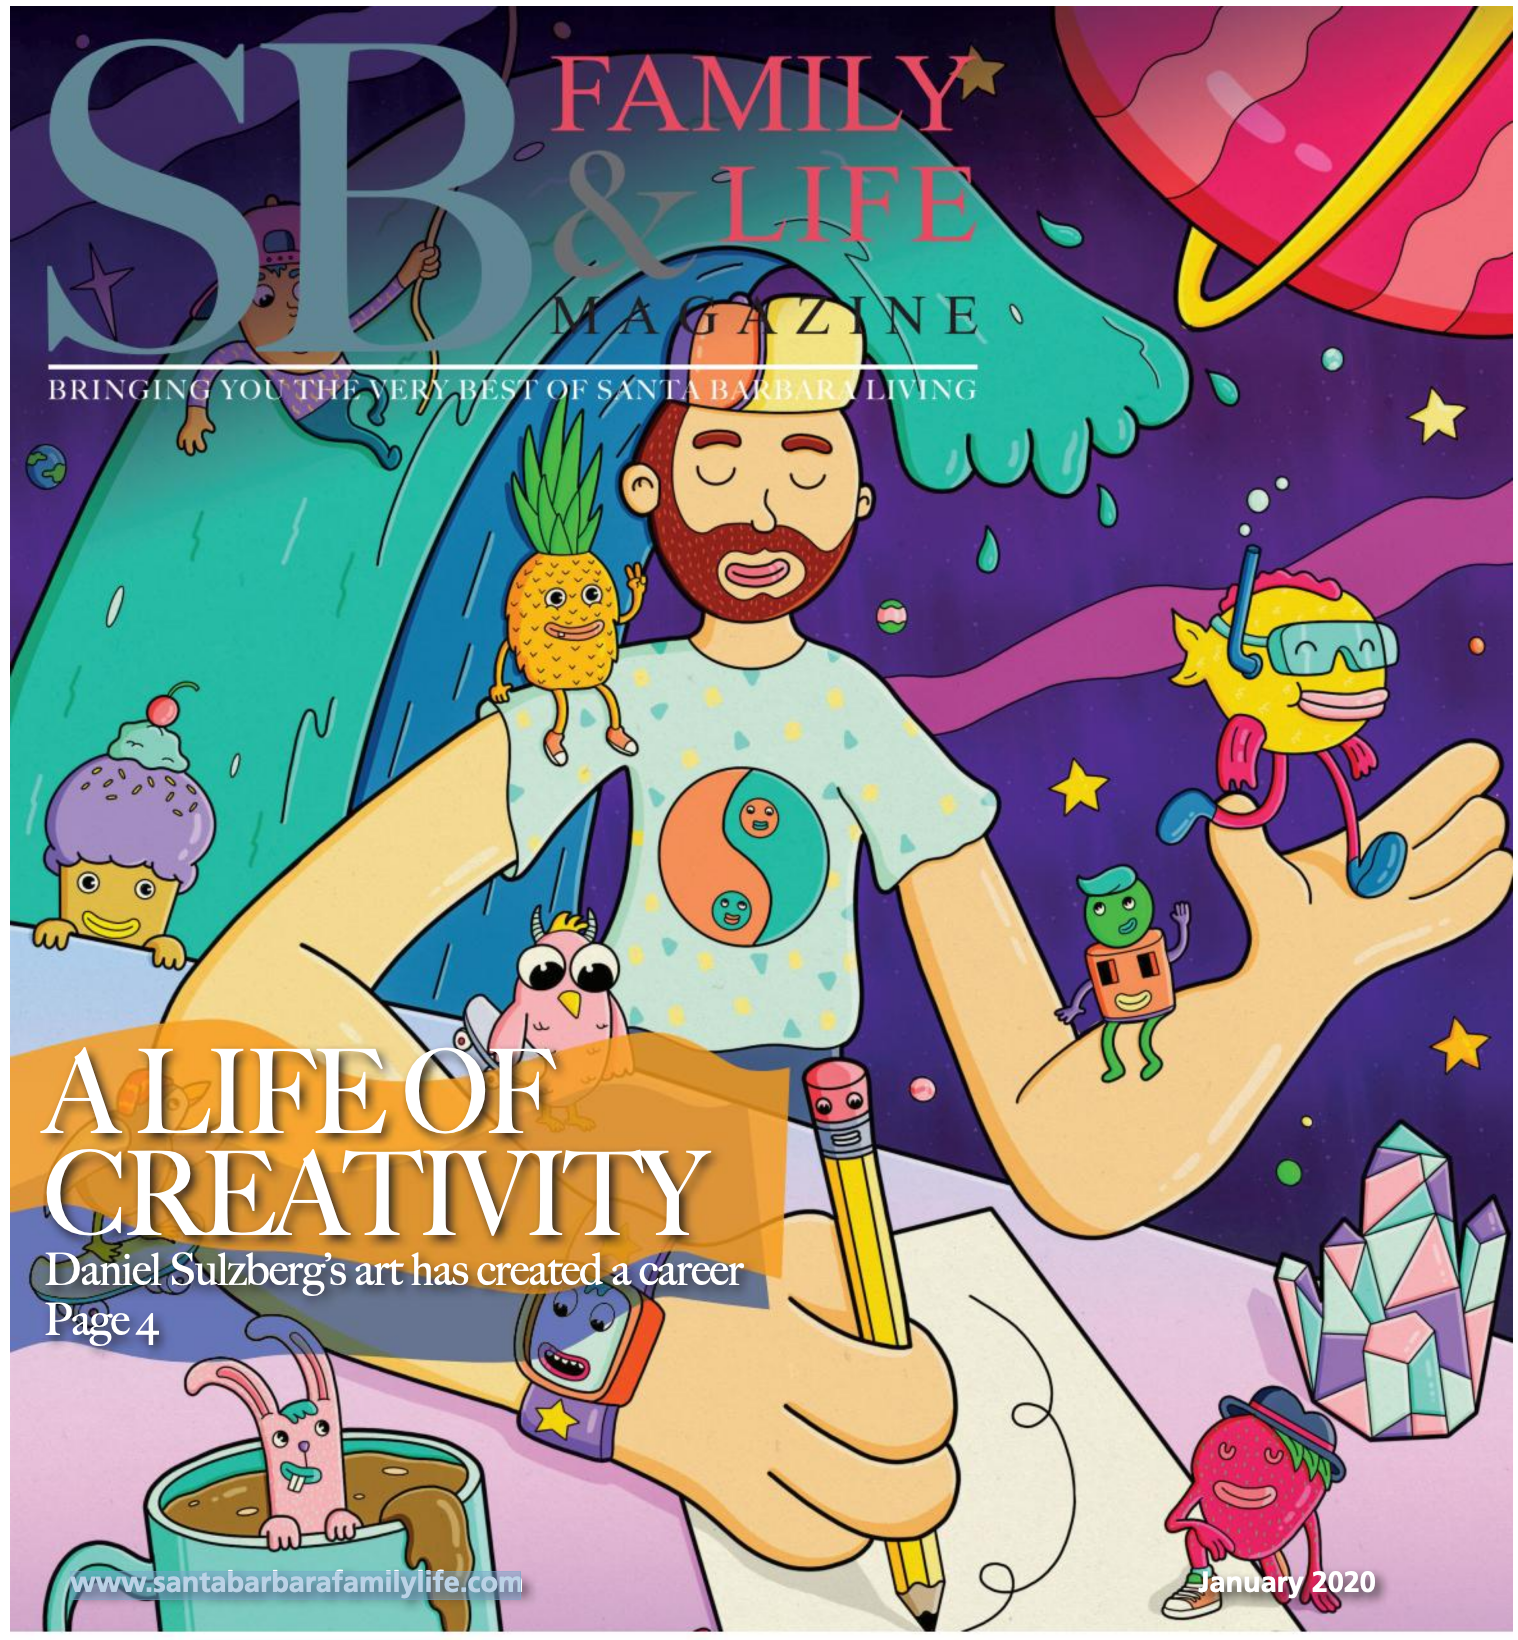 SB+Family&Life+Magazine+Cover.png